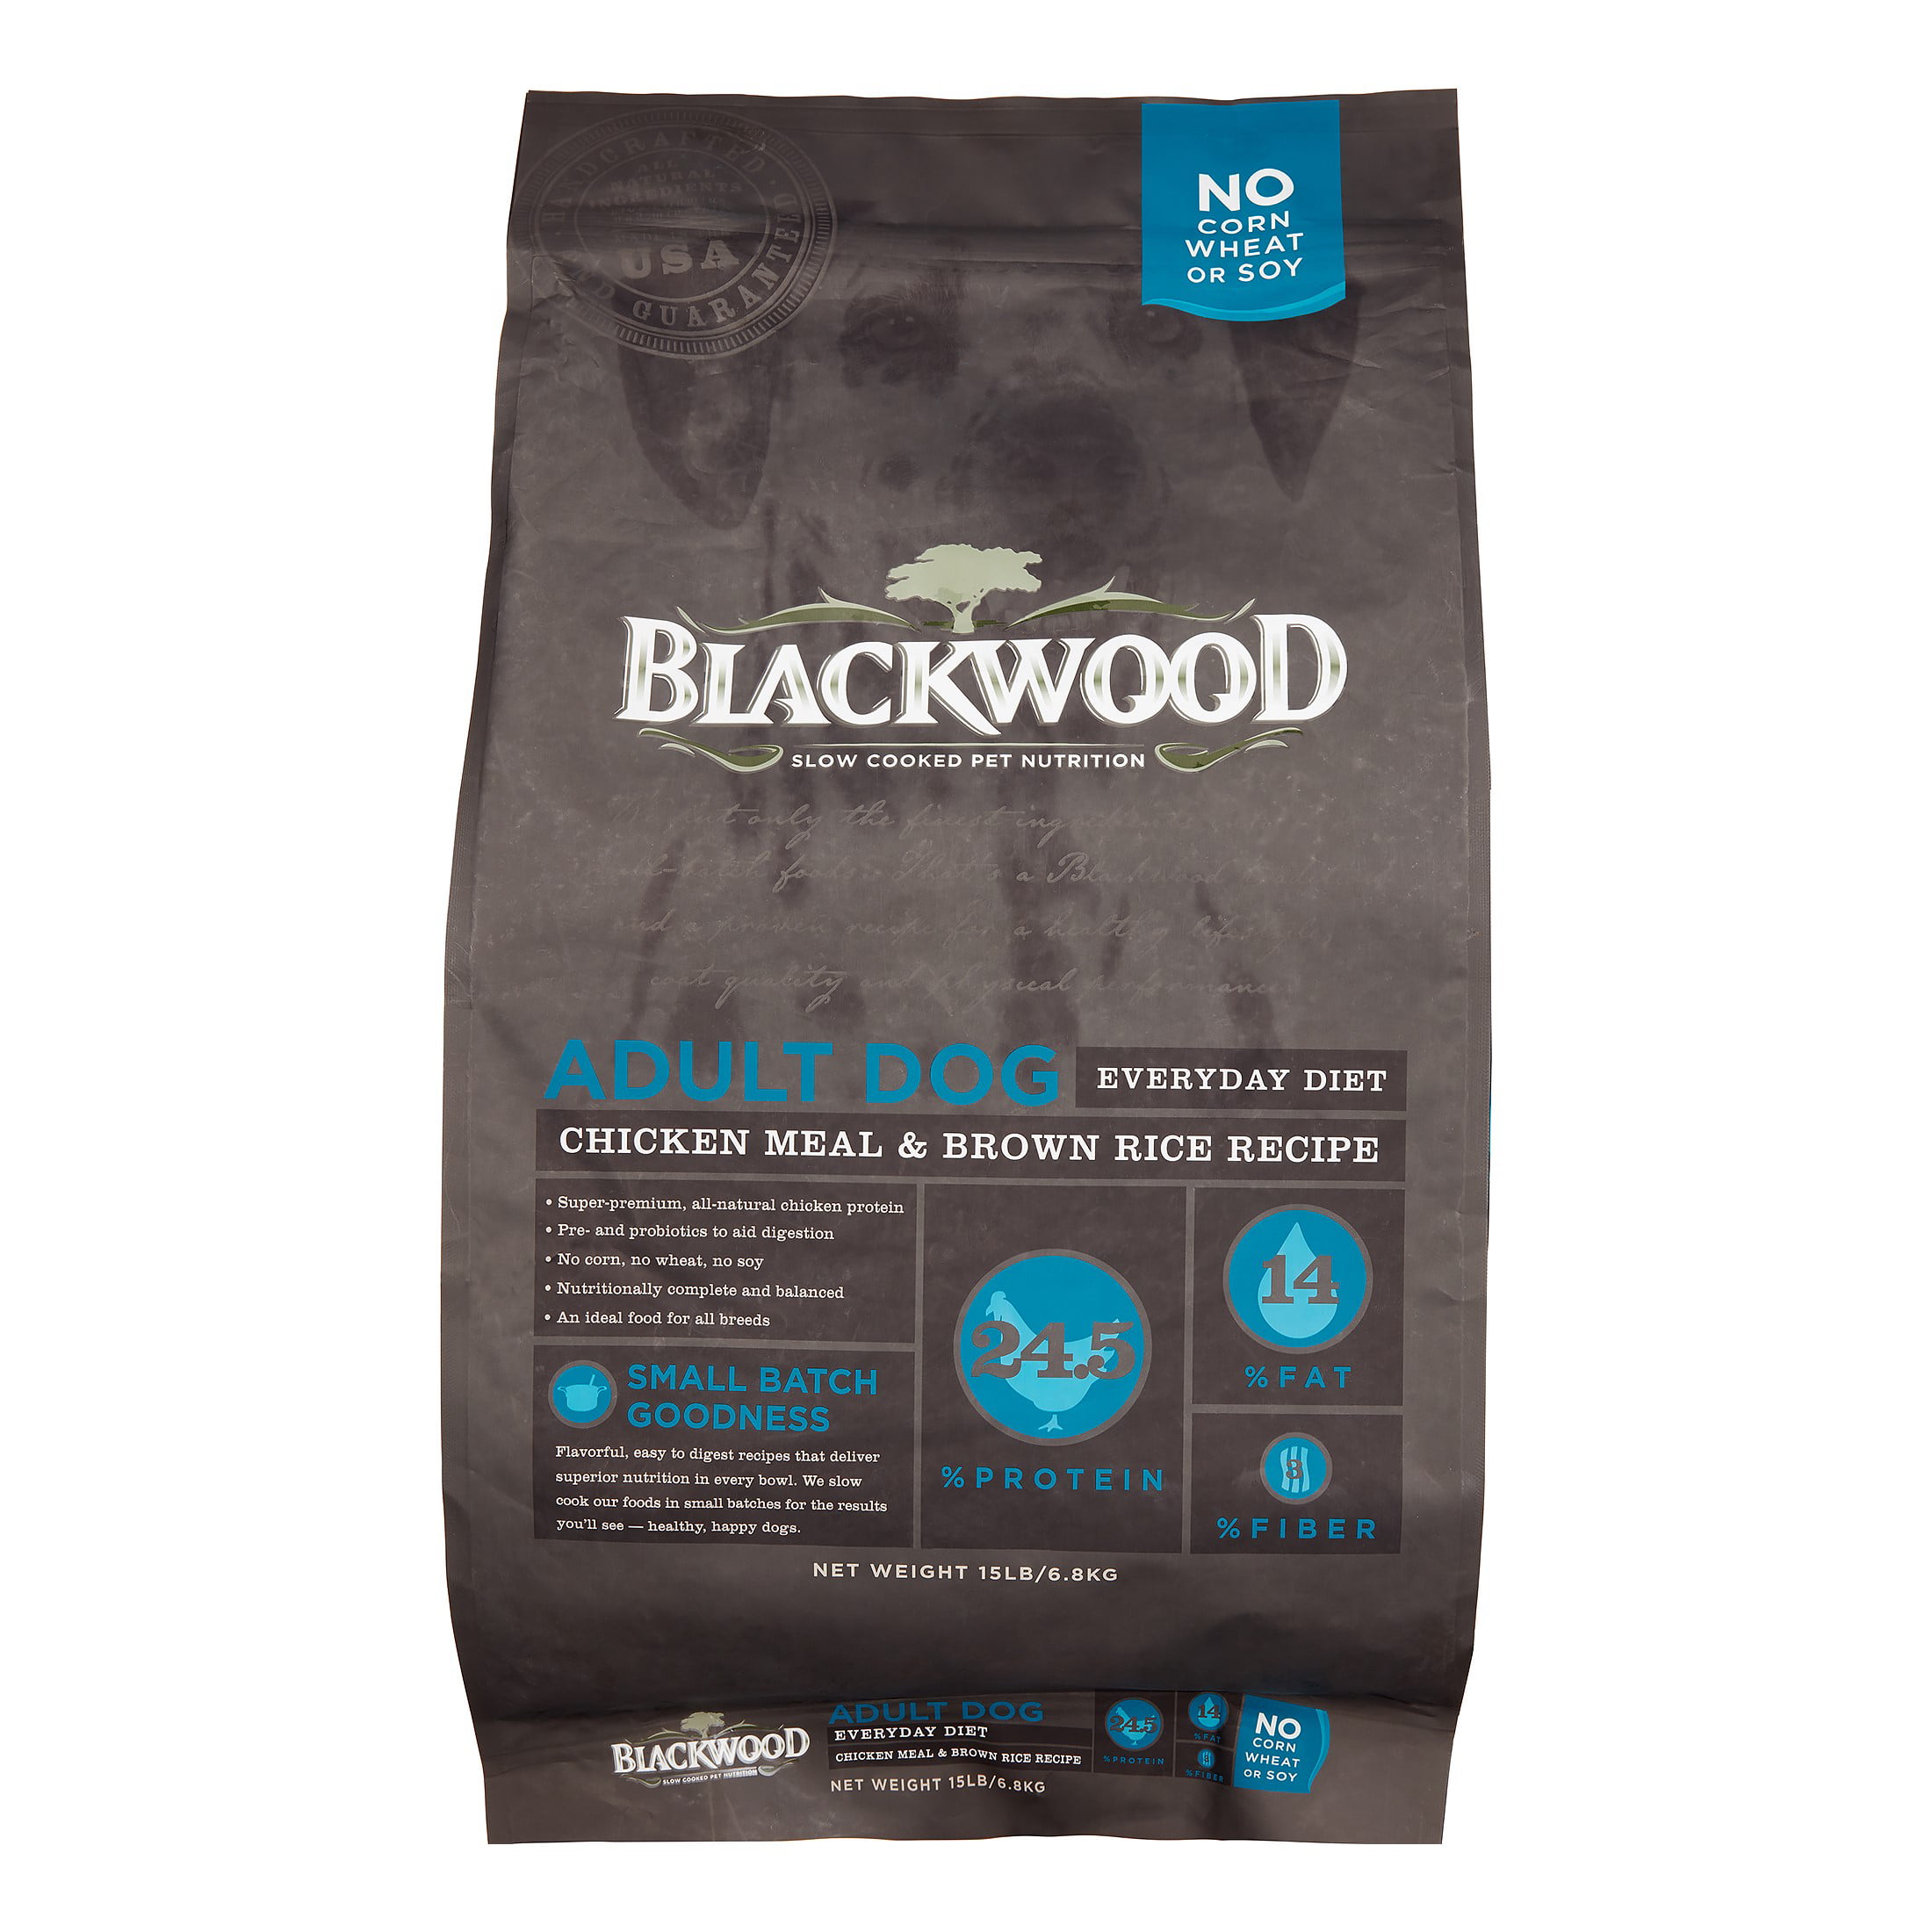 Blackwood Adult Chicken Meal & Brown Rice Recipe Dry Dog Food, 15 lbs 